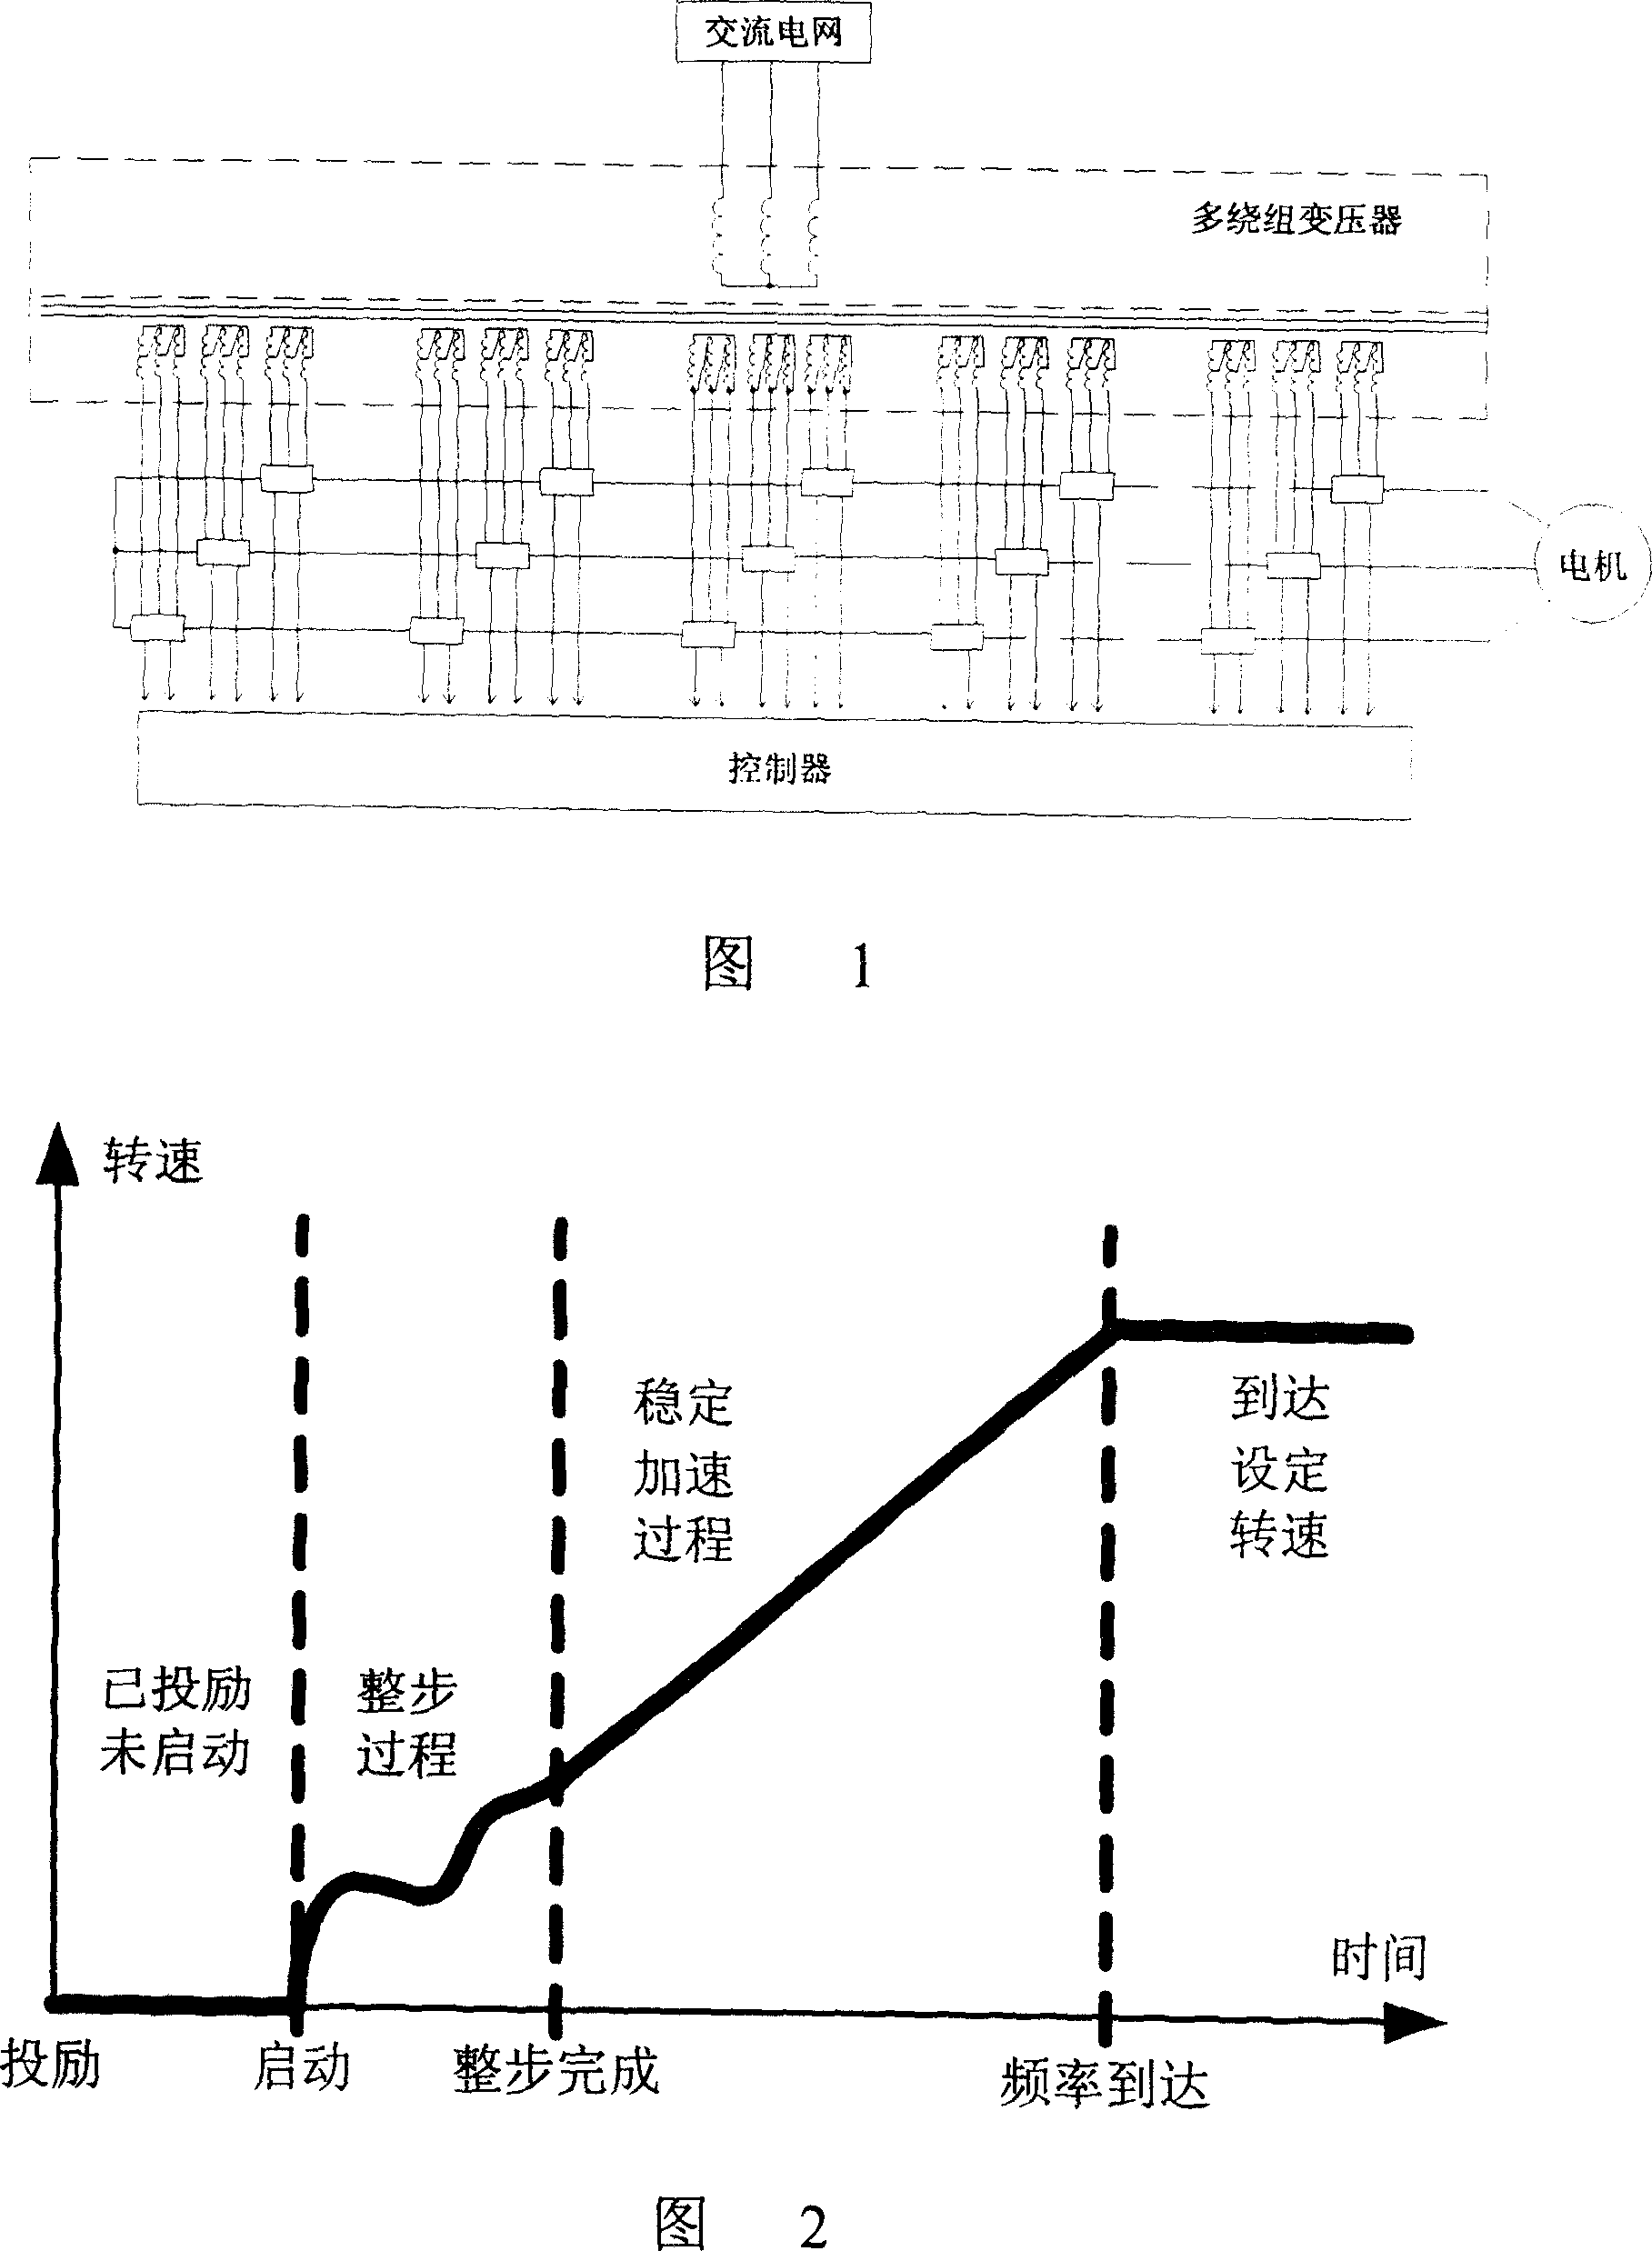 Method for driving synchronous machine to operation using power source type frequency converter